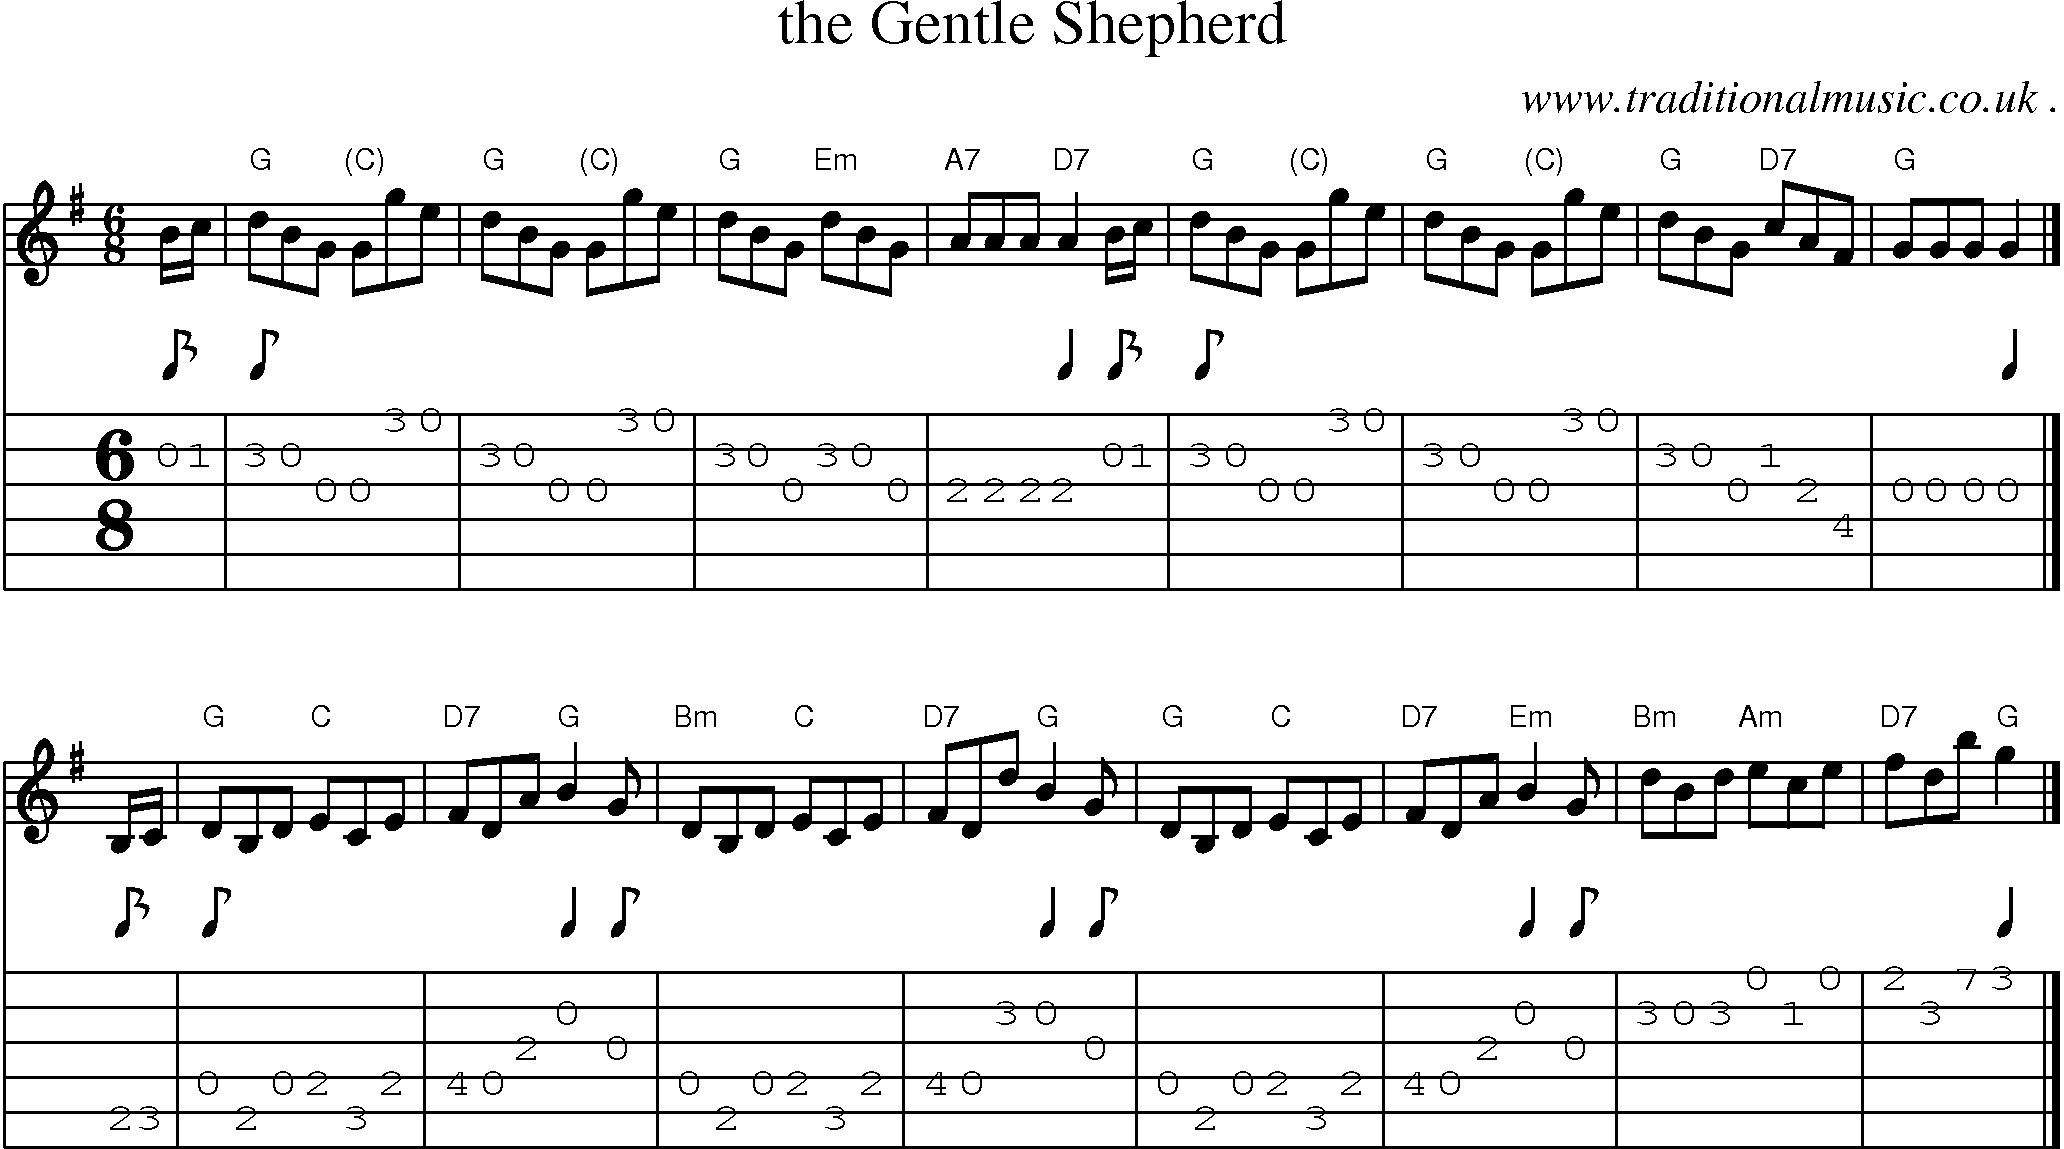 Sheet-music  score, Chords and Guitar Tabs for The Gentle Shepherd